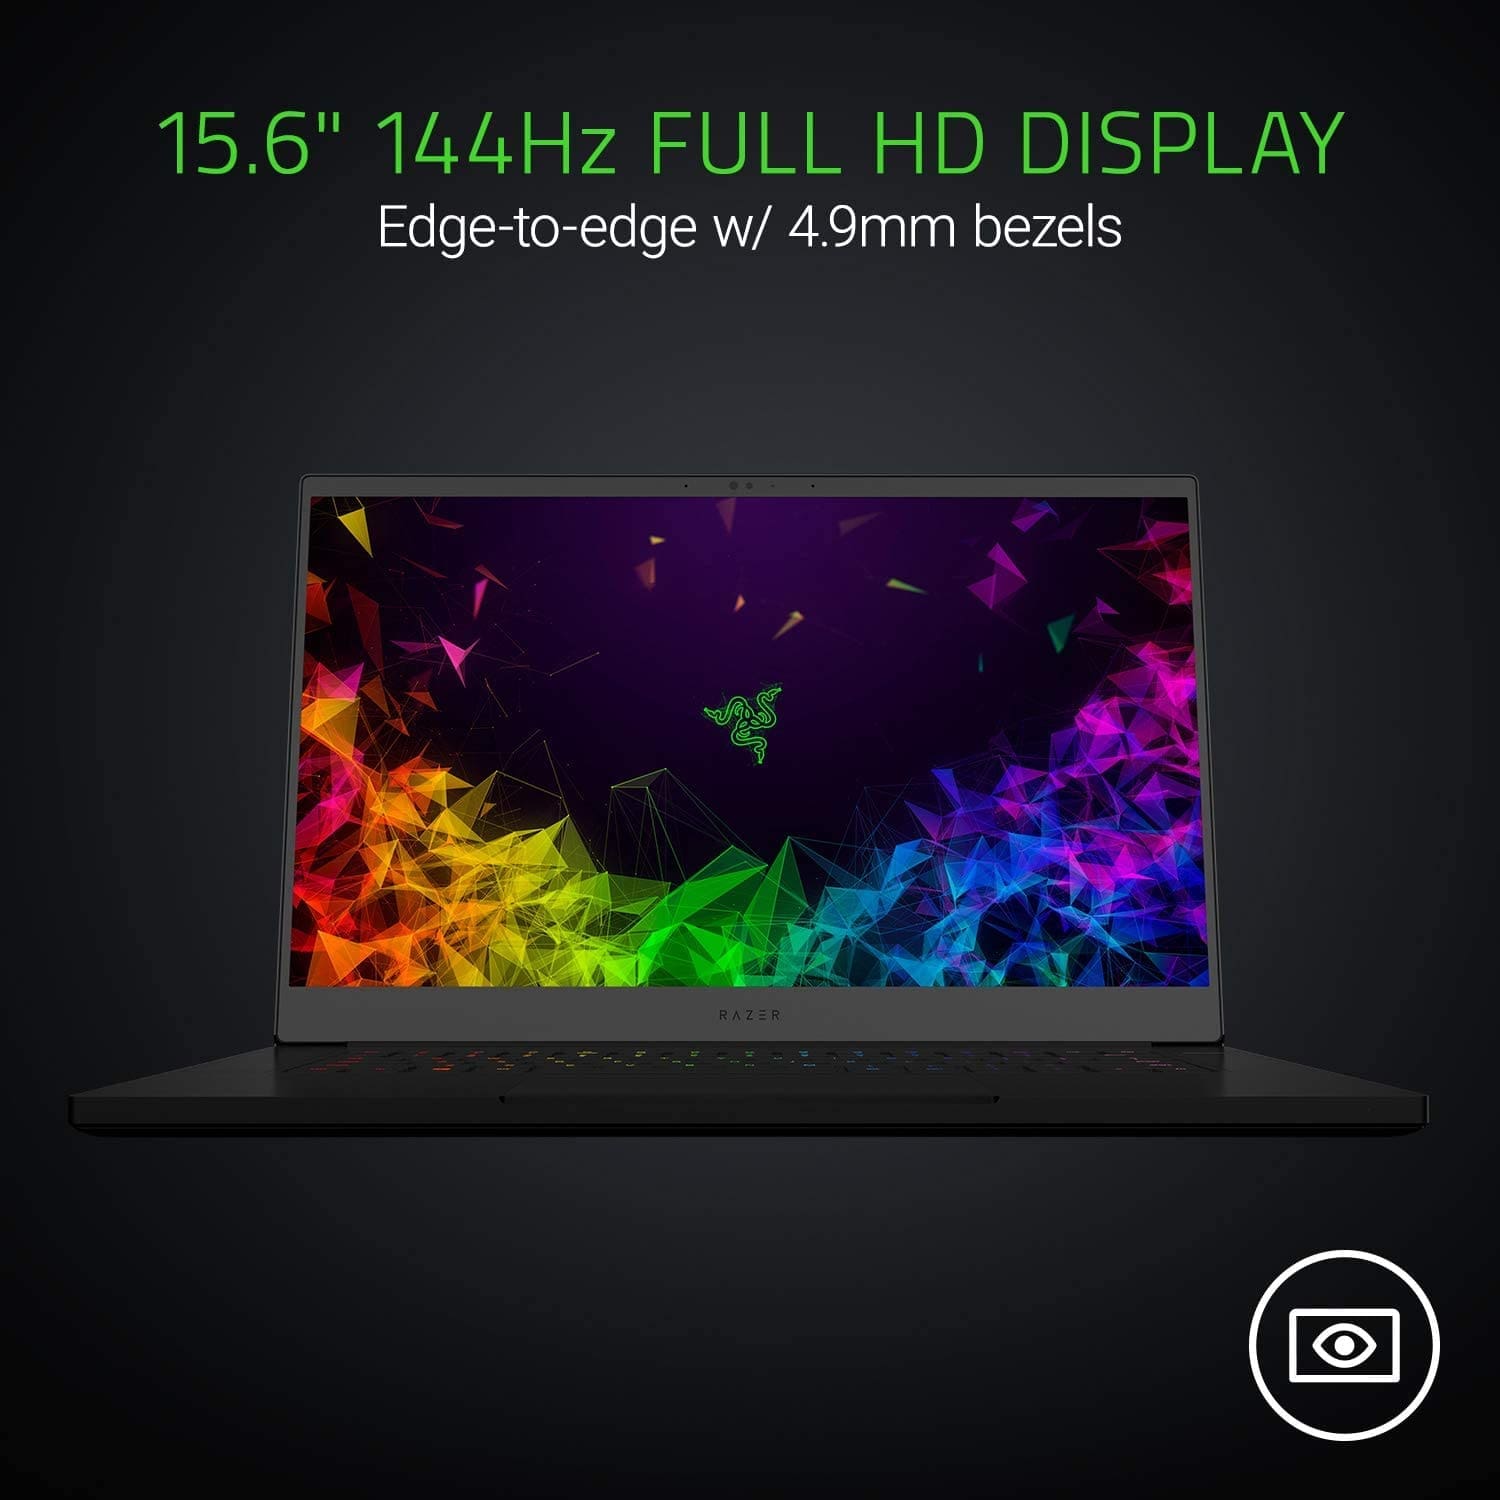 Razer Blade 15 gaming laptop: Intel Core i7-8750H 6-core enforced with Nvidia graphics